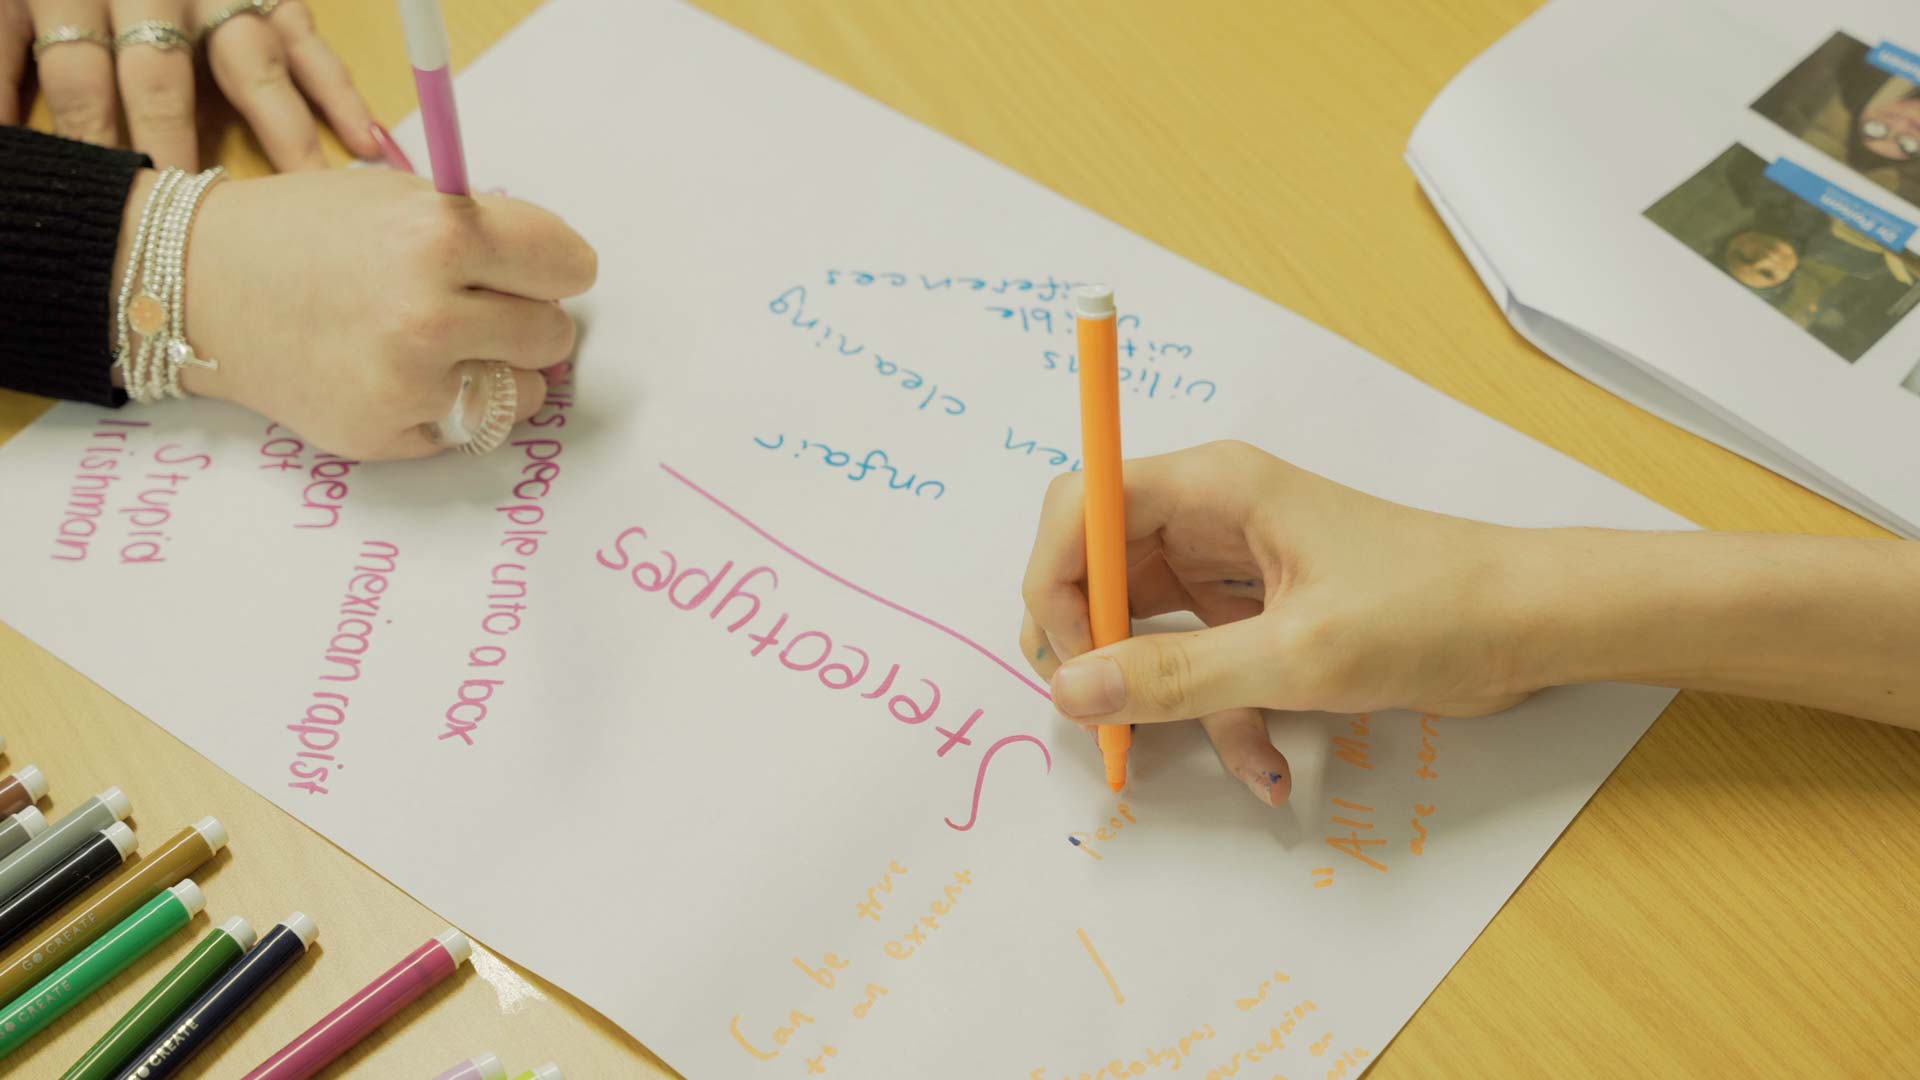 Young people creating a mind map about stereotypes on a piece of paper